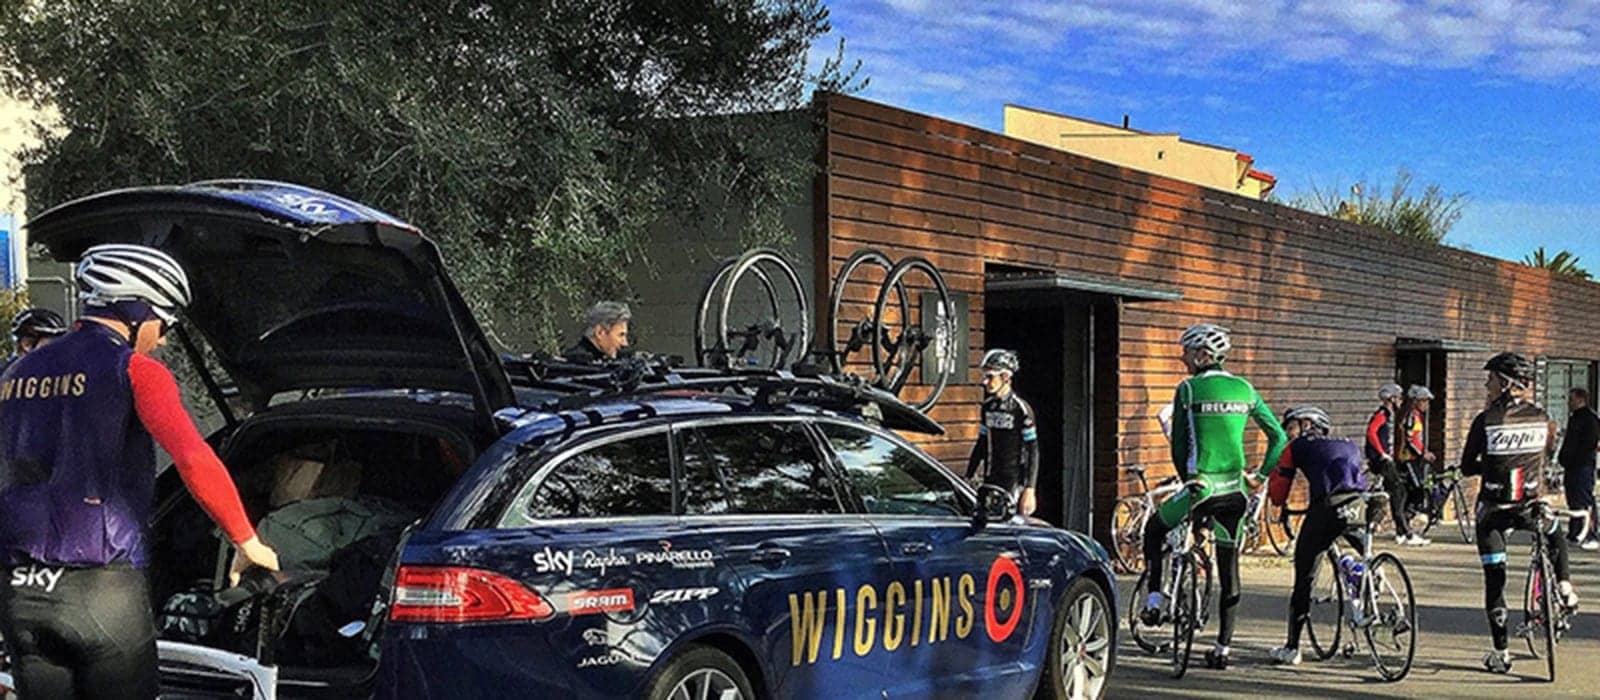 Team Wiggins riding out at Cambrils Sports Village